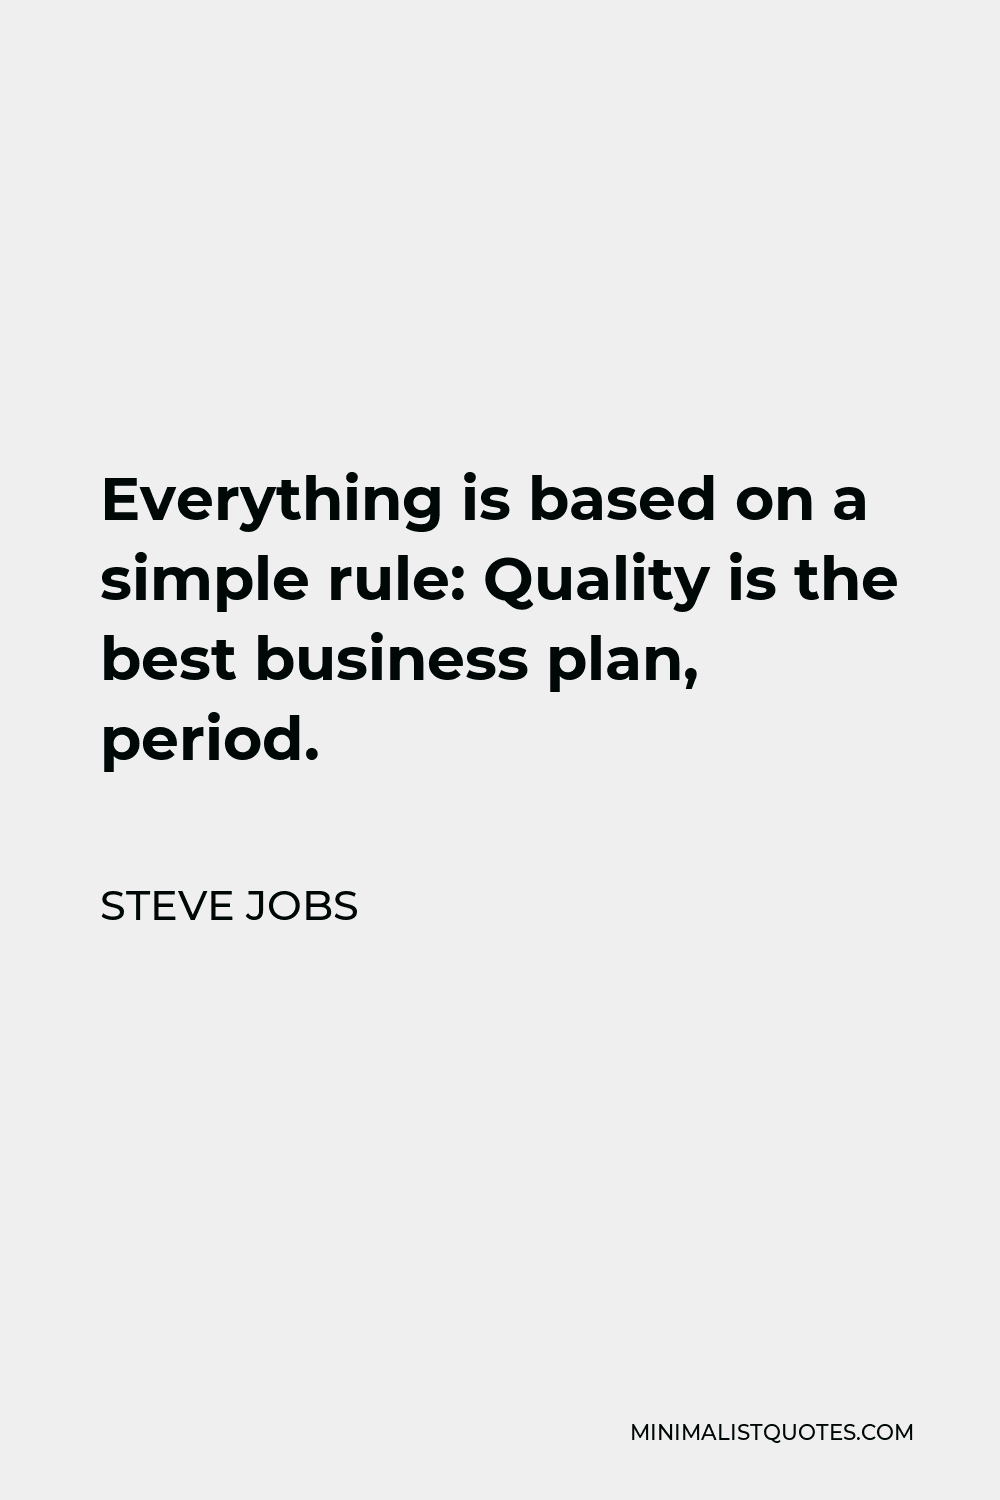 Steve Jobs Quote - Everything is based on a simple rule: Quality is the best business plan, period.